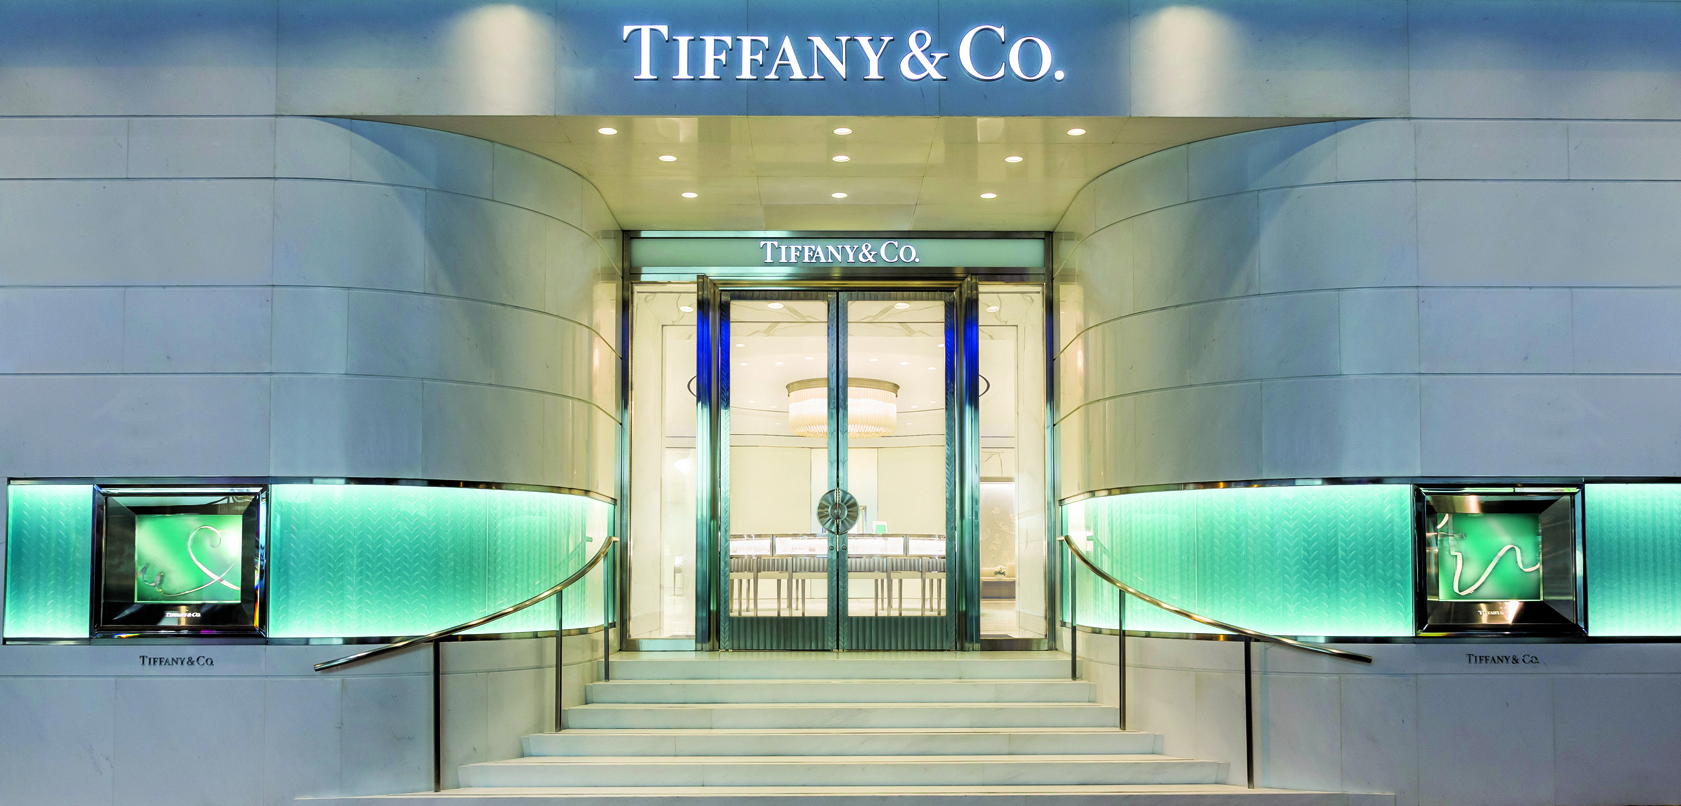 How To Check Your Tiffany & Co Gift Card Balance